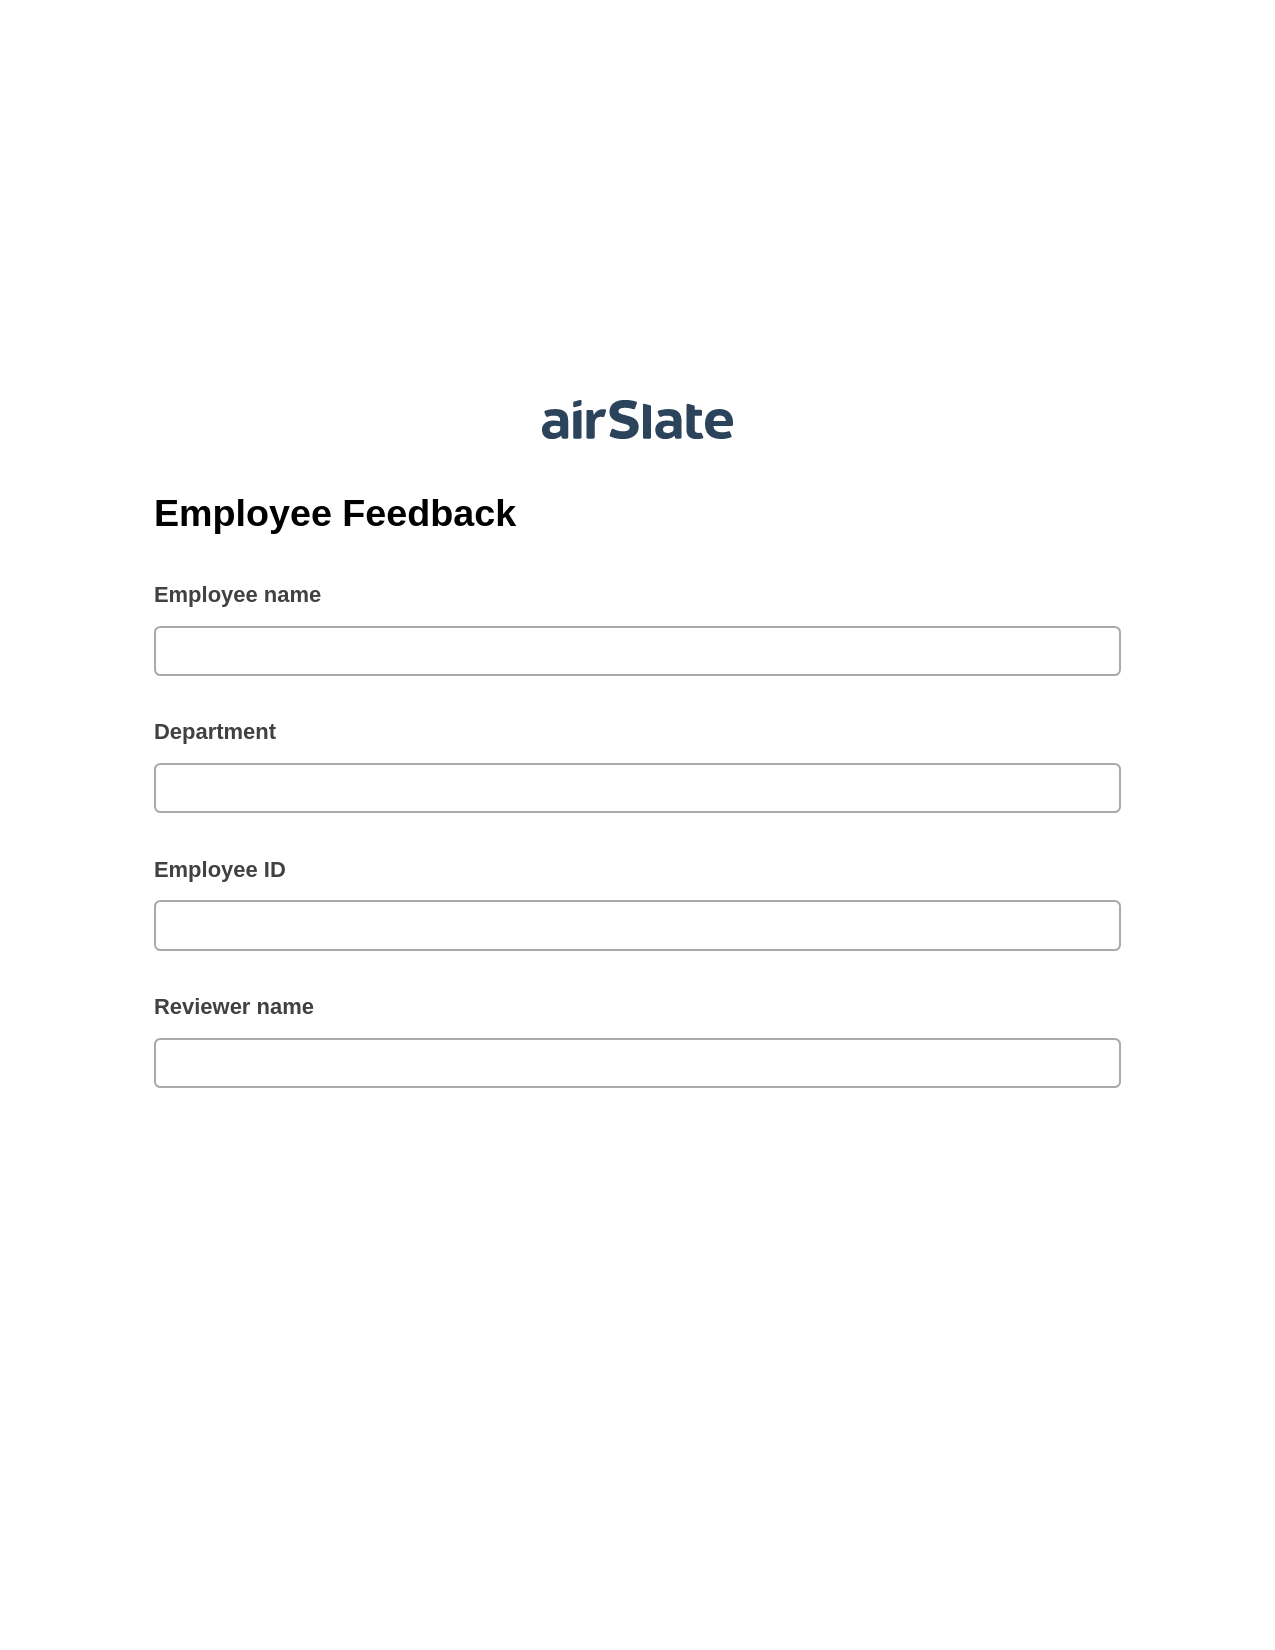 Employee Feedback Pre-fill from Google Sheet Dropdown Options Bot, Pre-fill with Custom Data Bot, Export to Smartsheet